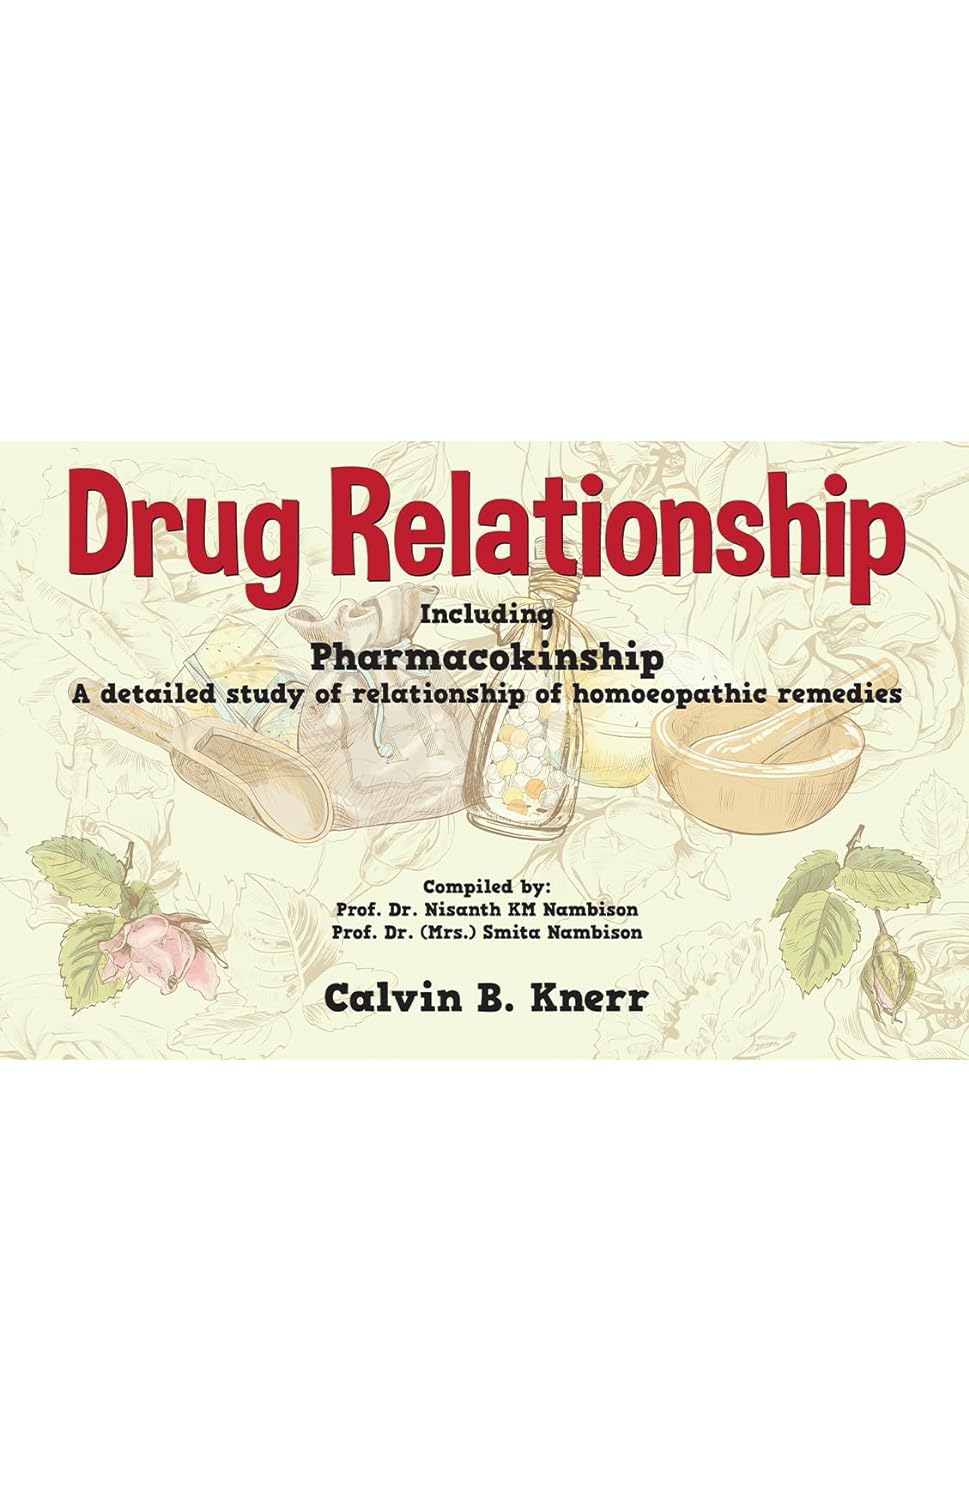 Drug Relationship - Including Pharmacokinship A detailed Study of Relationship of Homeopathic Remedies